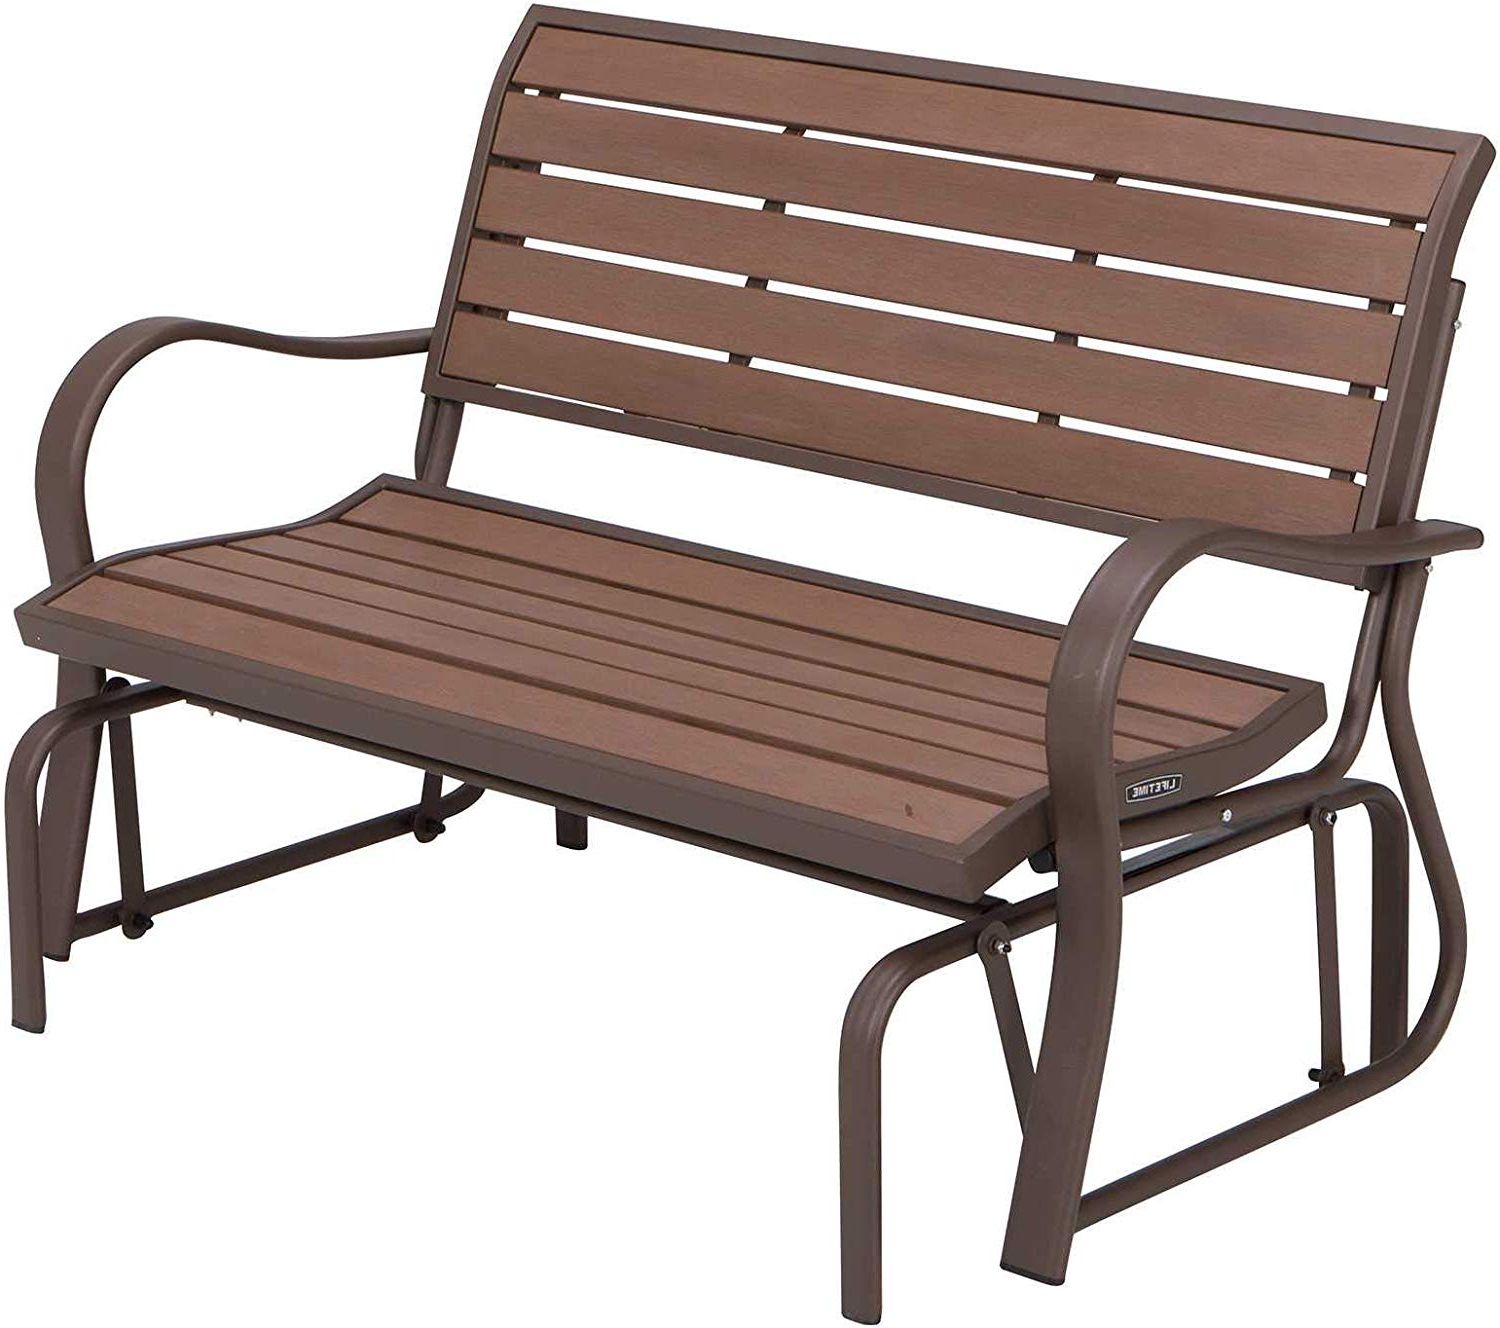 Latest Lifetime 60290 Wood Alternative Glider Bench, Mocha Brown In Low Back Glider Benches (View 13 of 30)